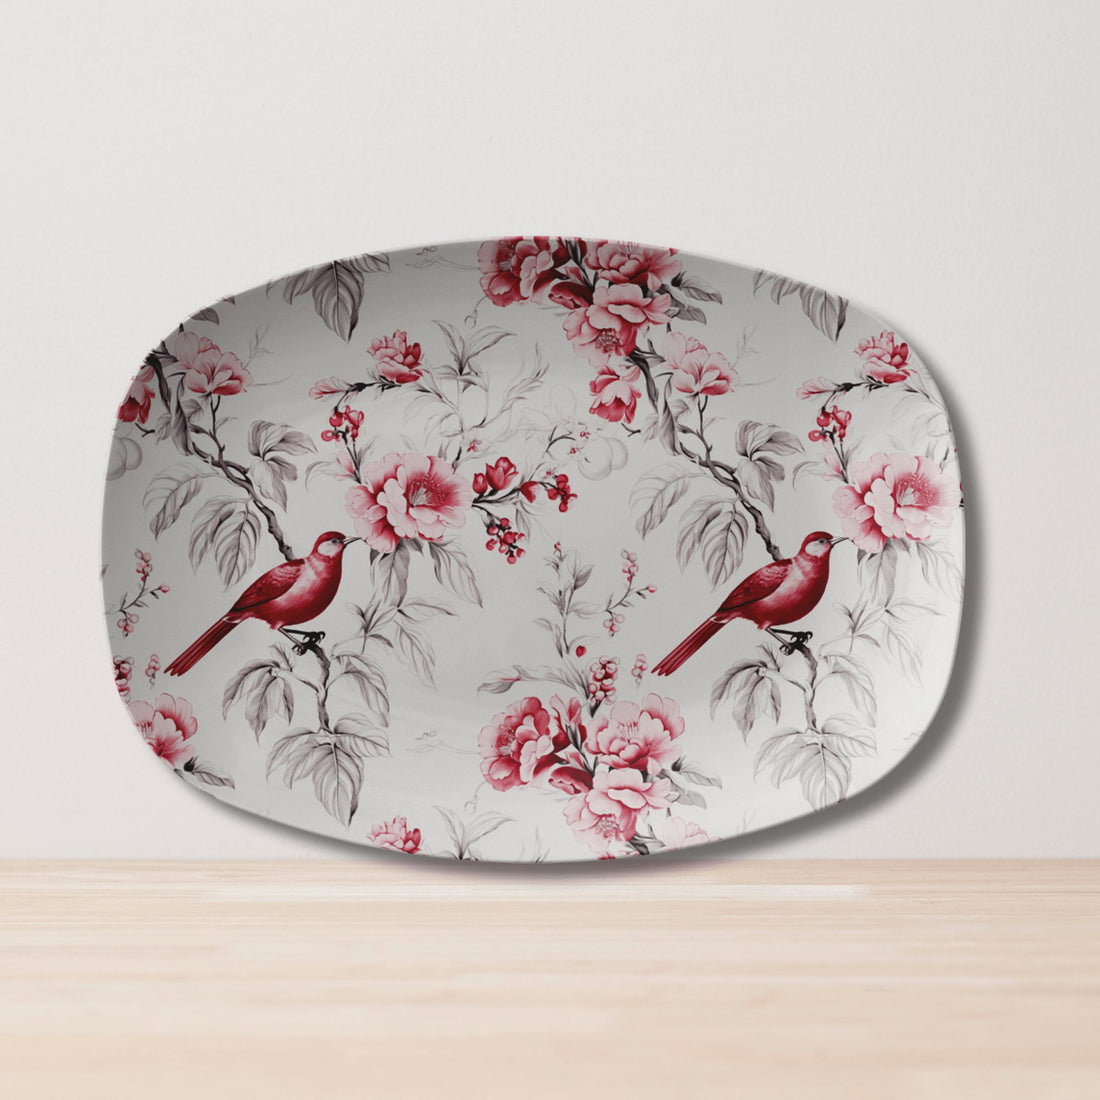 Kate McEnroe New York Chinoiserie Botanical Toile Floral Cranberry Red and White Serving Platter - 133682923Serving PlattersP23 - CHI - CBR - 4